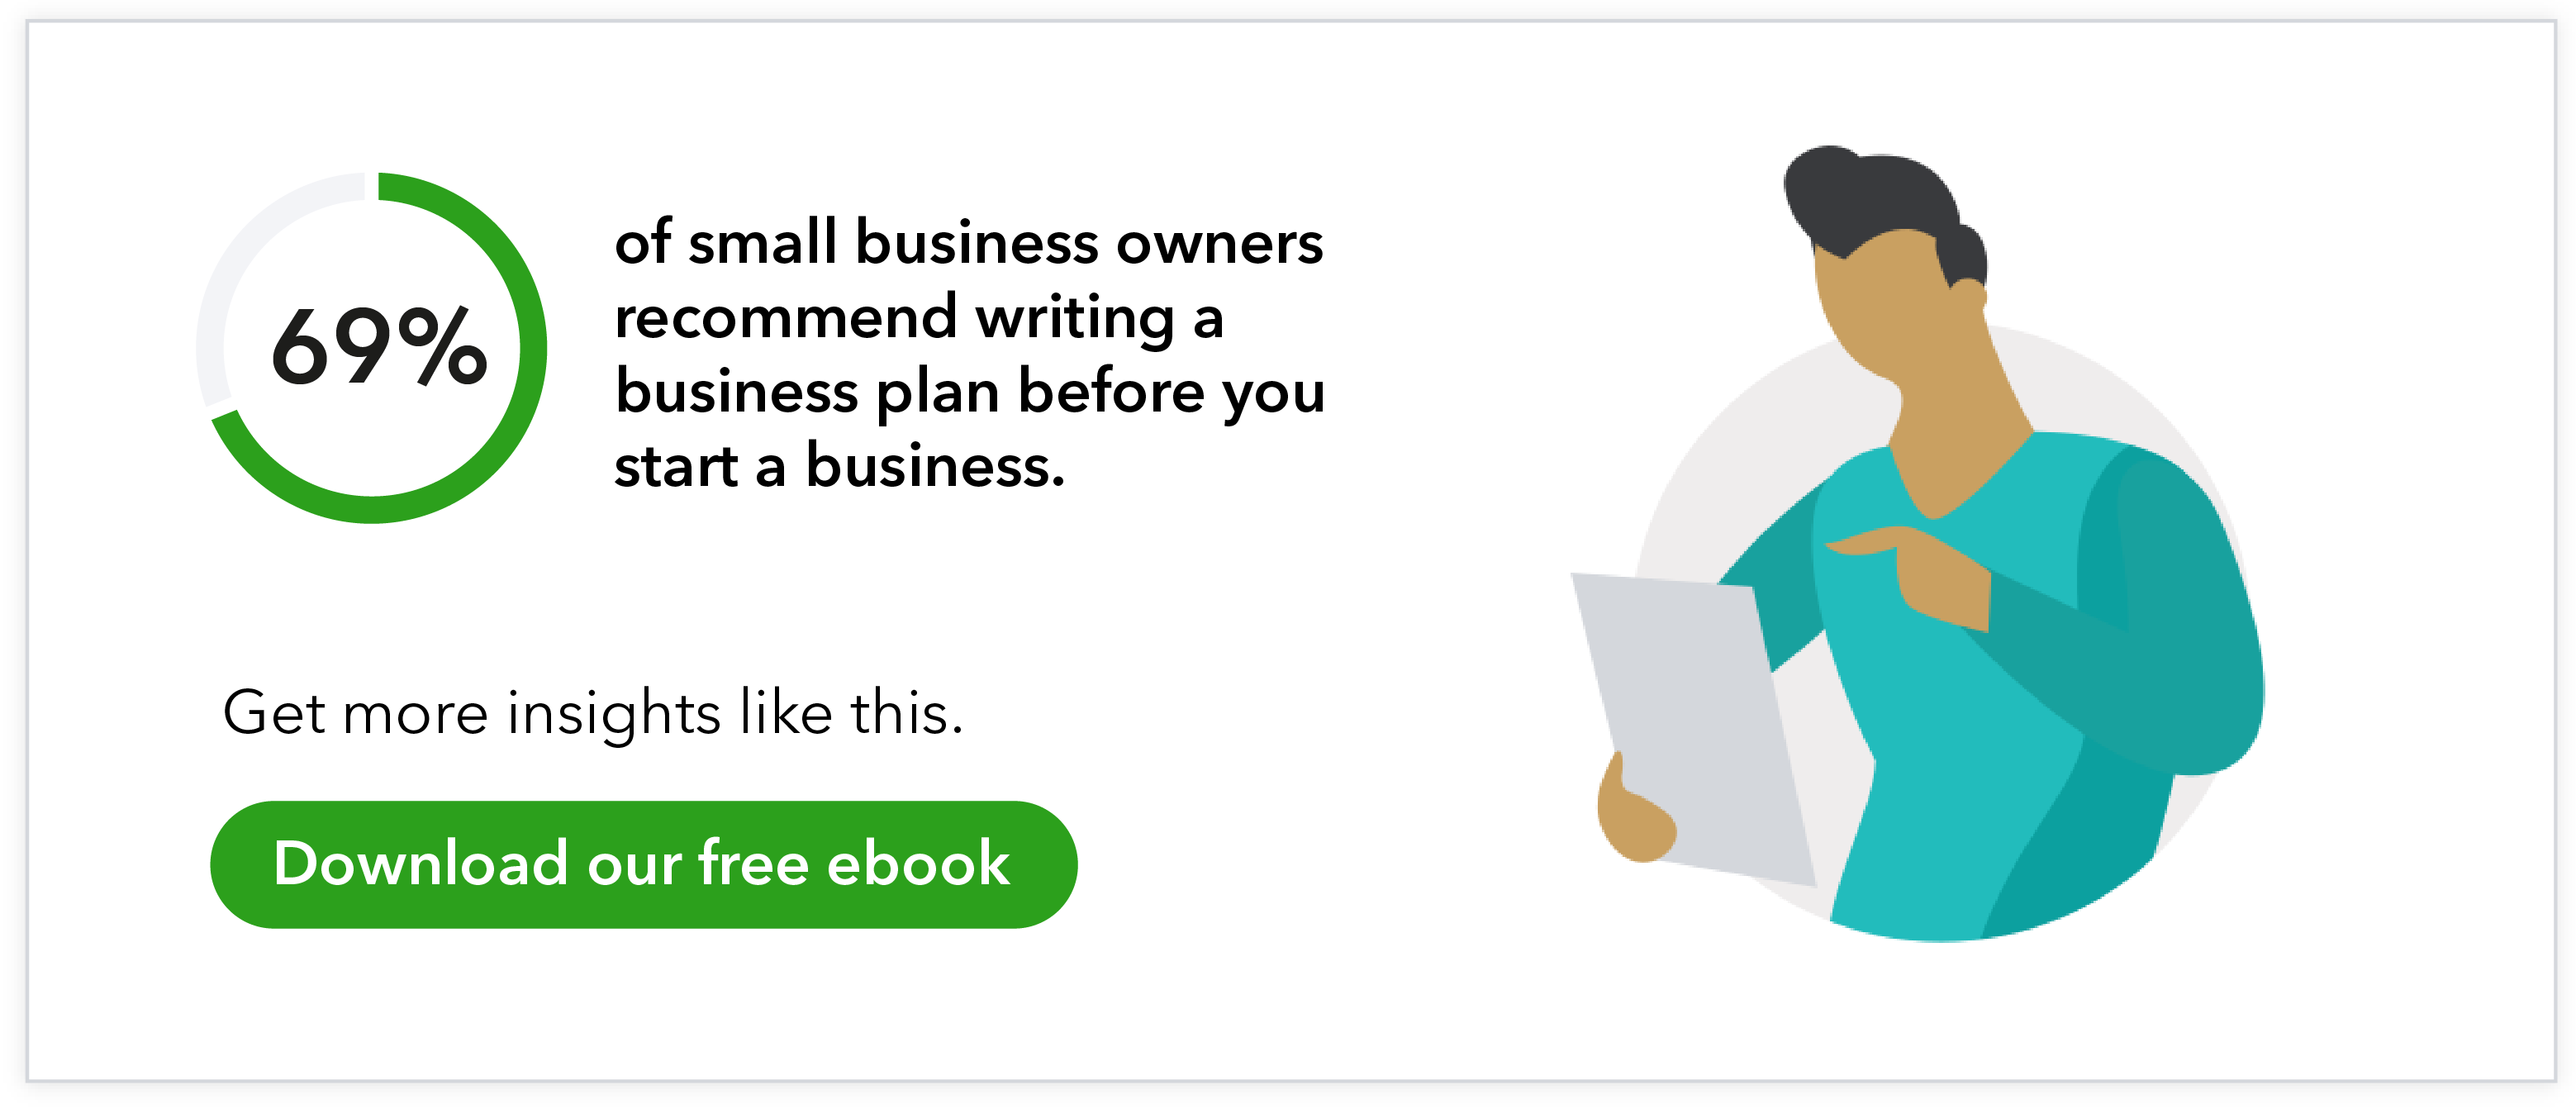 69% of small business owners recommend writing a business plan before you start a business. Get more insights like this. Download our free ebook. 